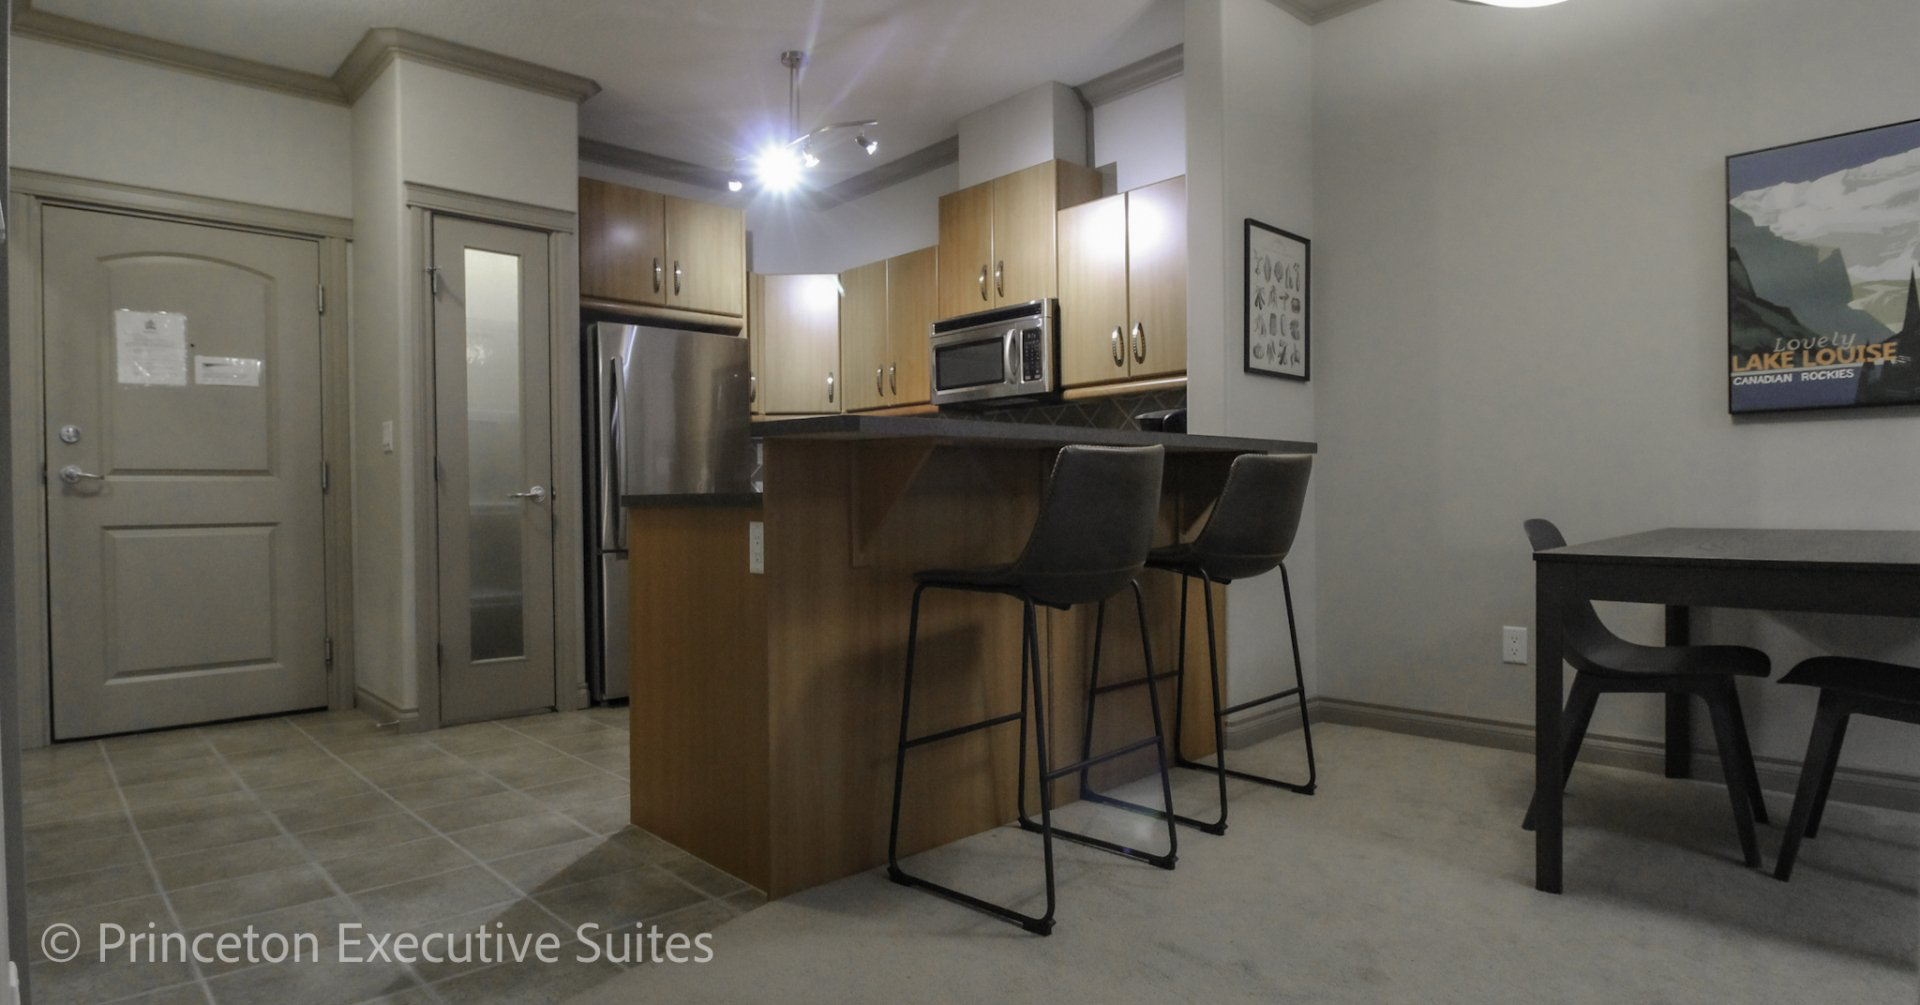 Eating bar and kitchen of Edmonton furnished apartment